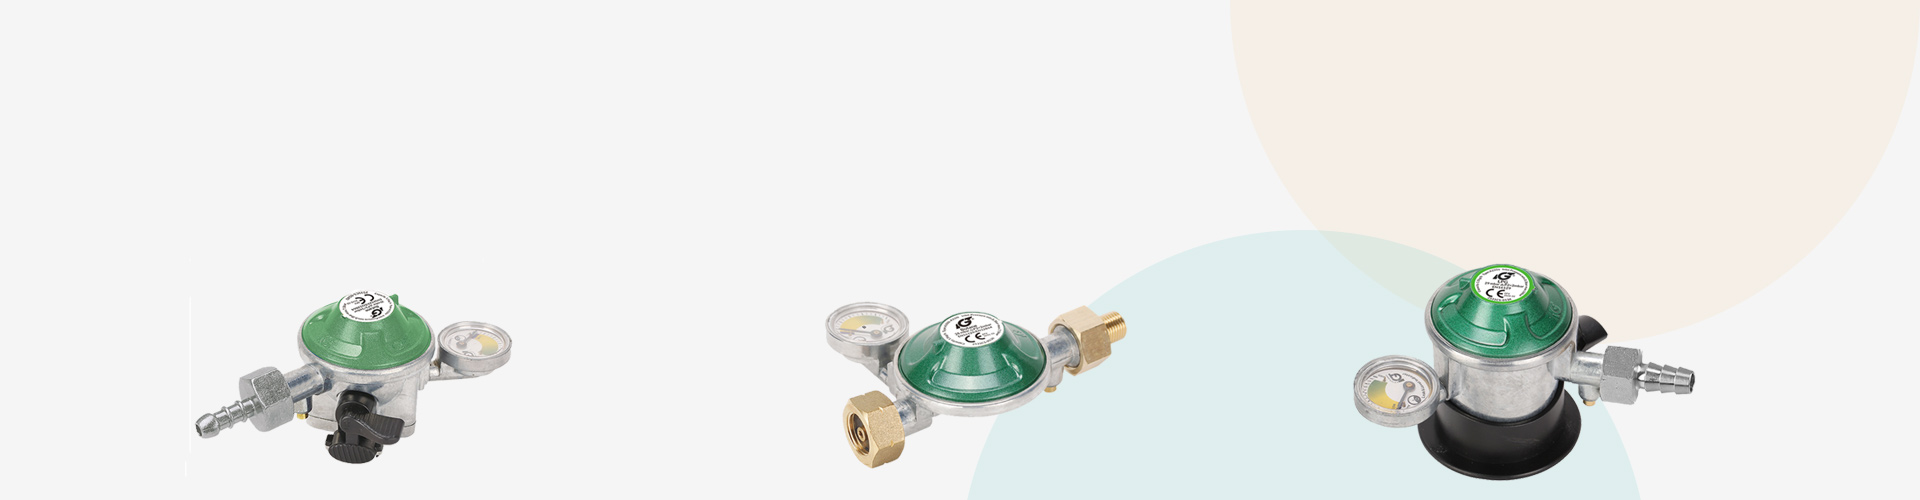 What Are the Types of Gas Pressure Regulators?